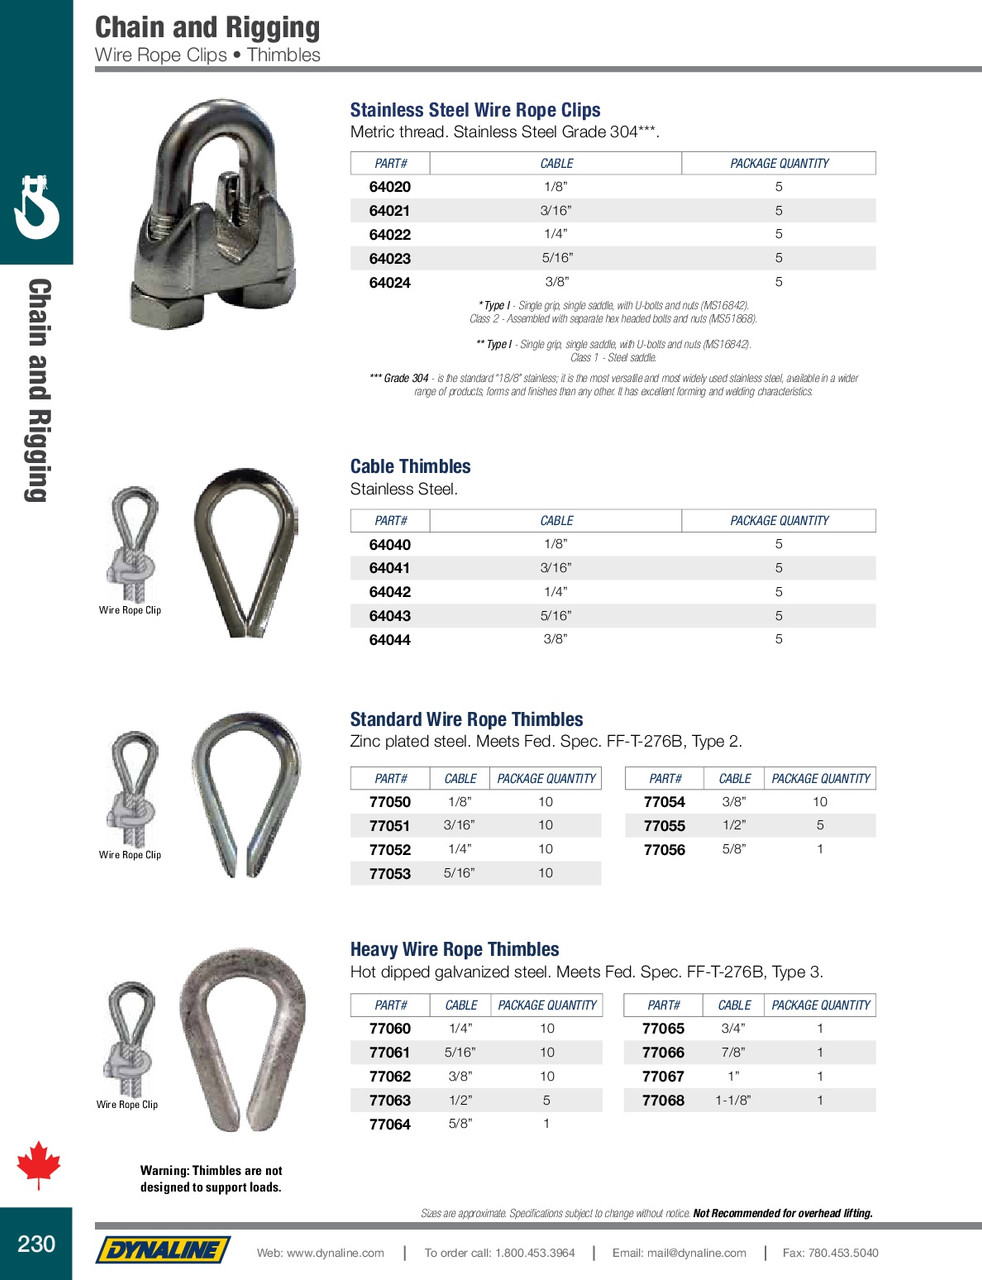 Stainless Steel Wire Rope Clip 1/8"  64020